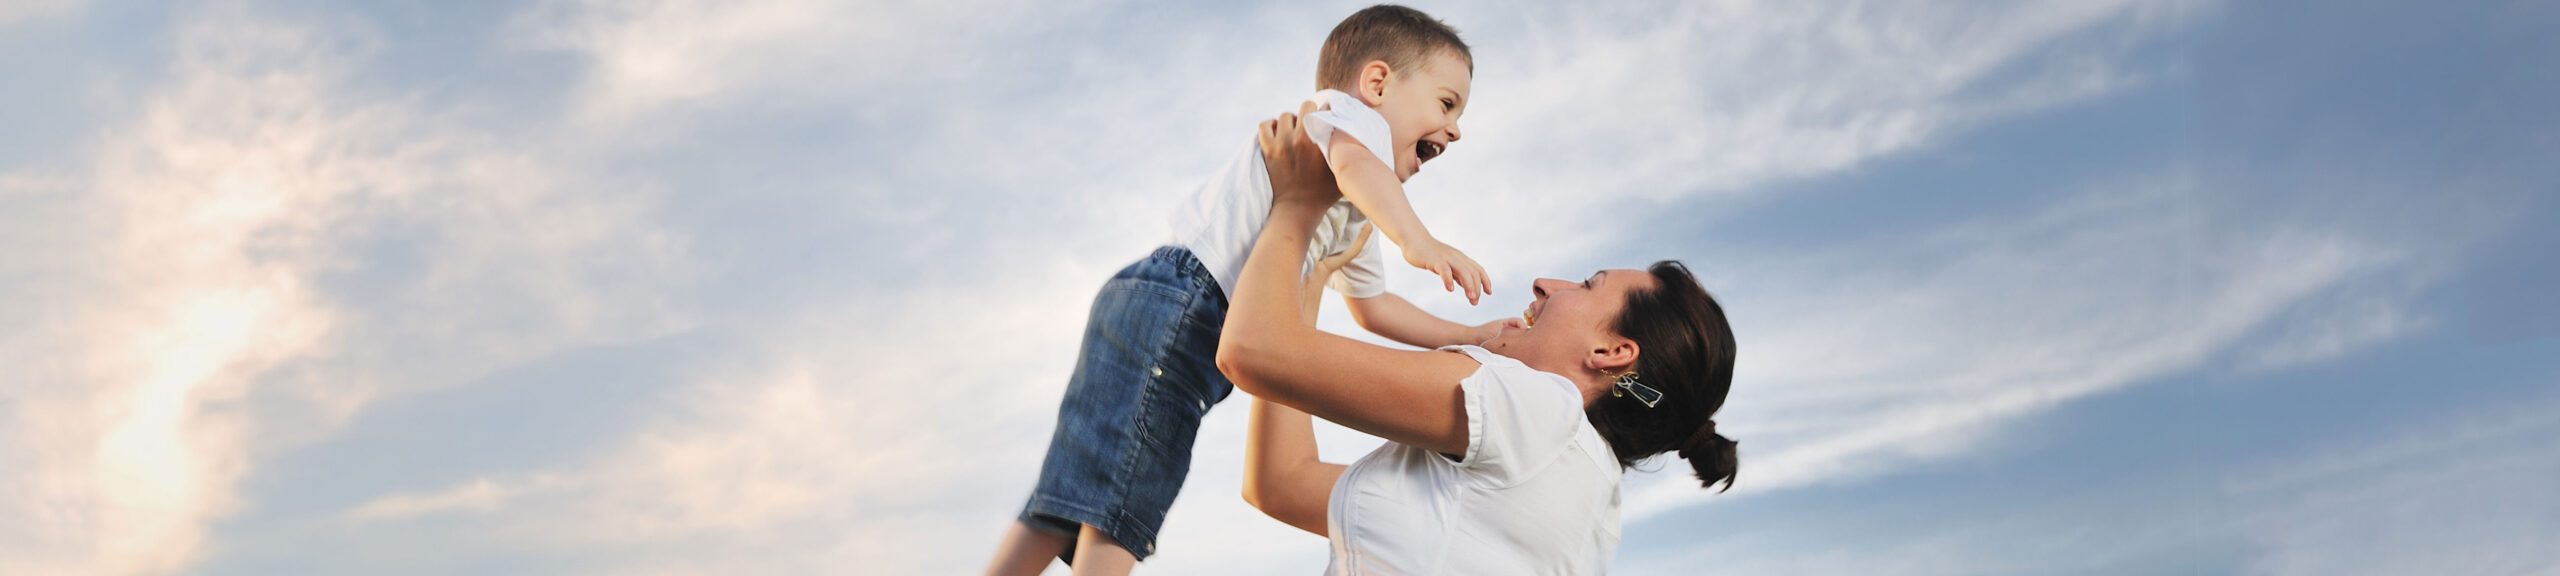 A woman joyfully lifts a young boy into the air against a backdrop of a softly clouded blue sky, both smiling and enjoying the moment, symbolizing the positive outcomes that child support attorneys strive to